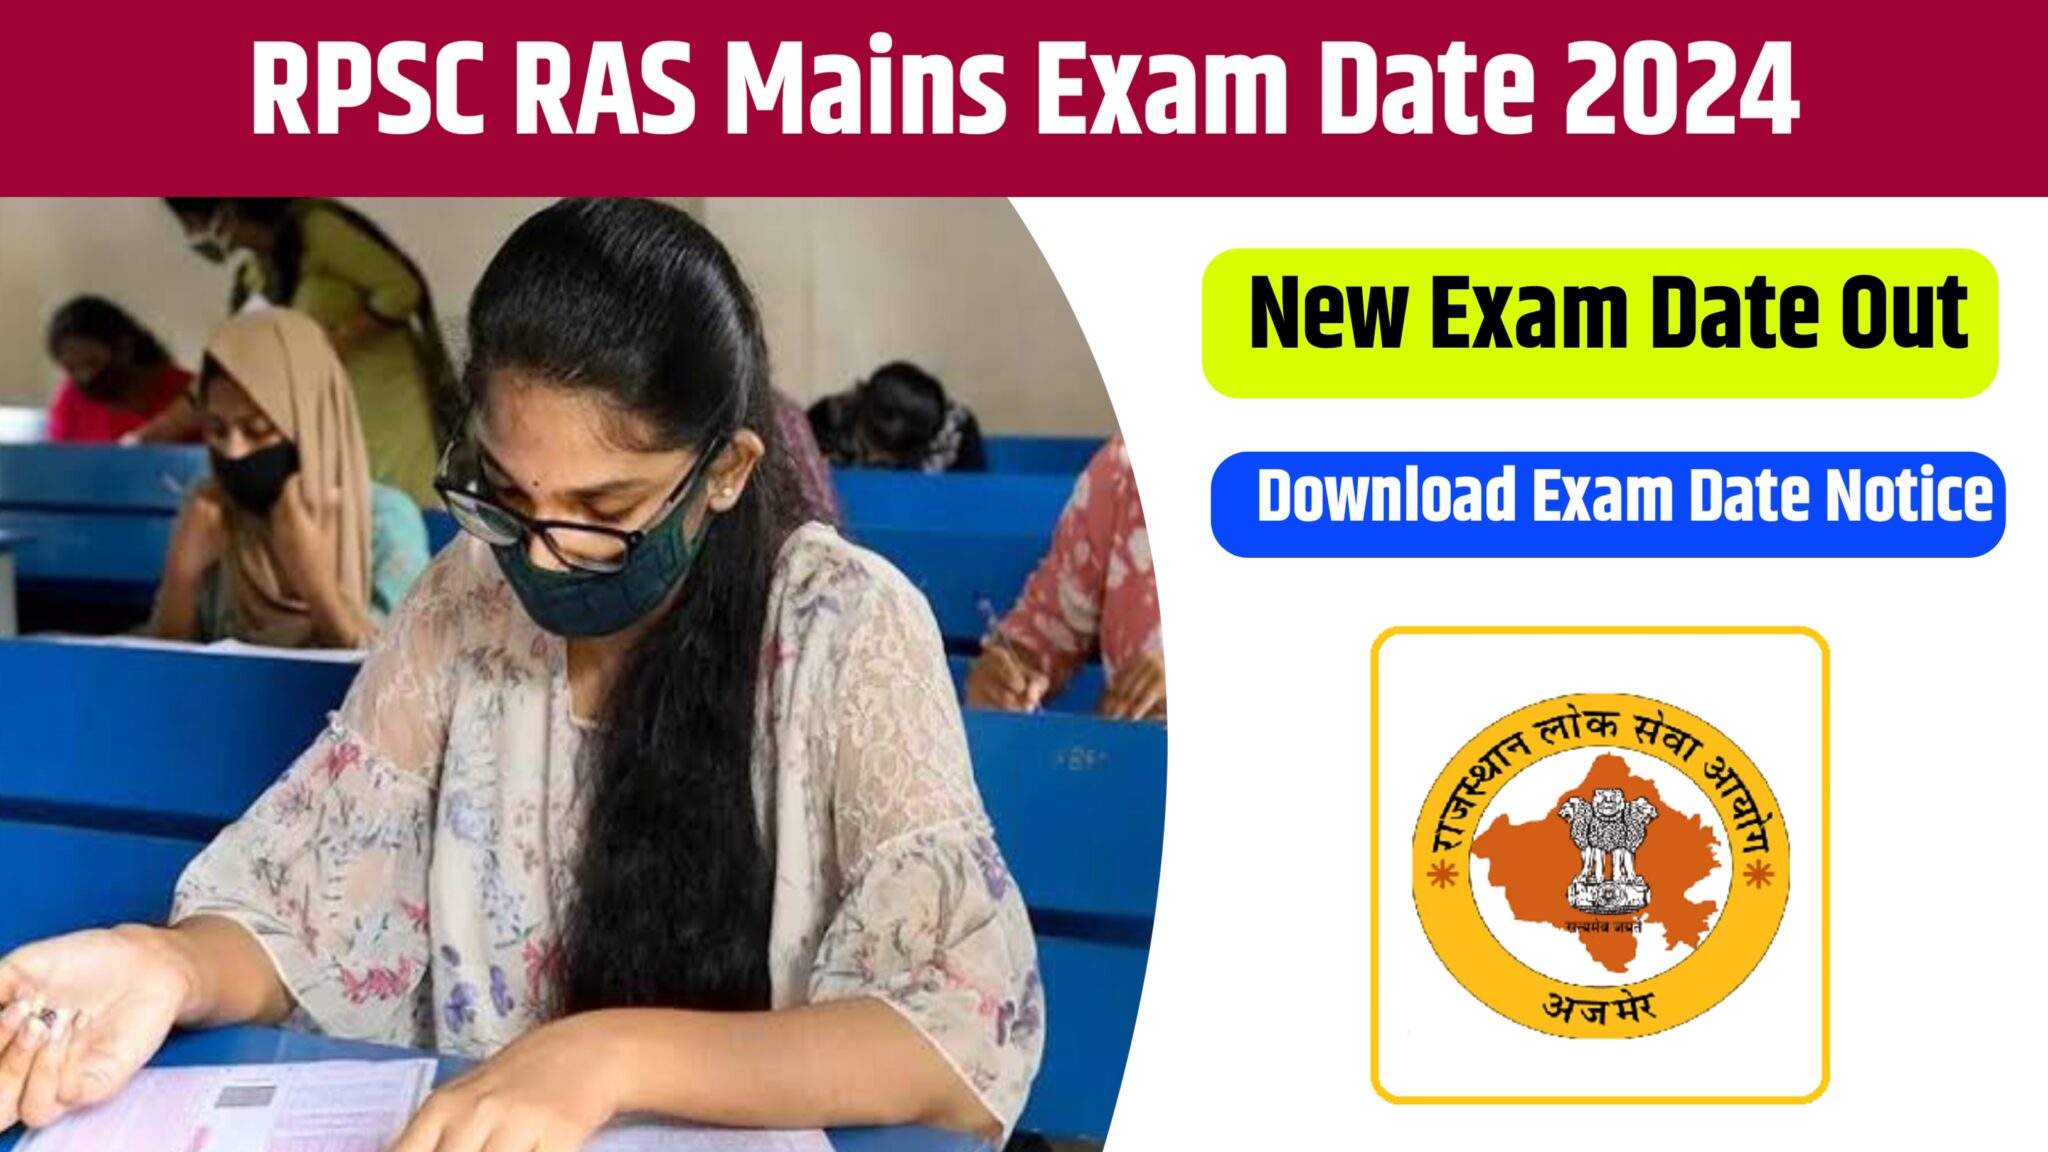 RPSC RAS Mains Exam Date 2024 New Exam Date Related Official Notice